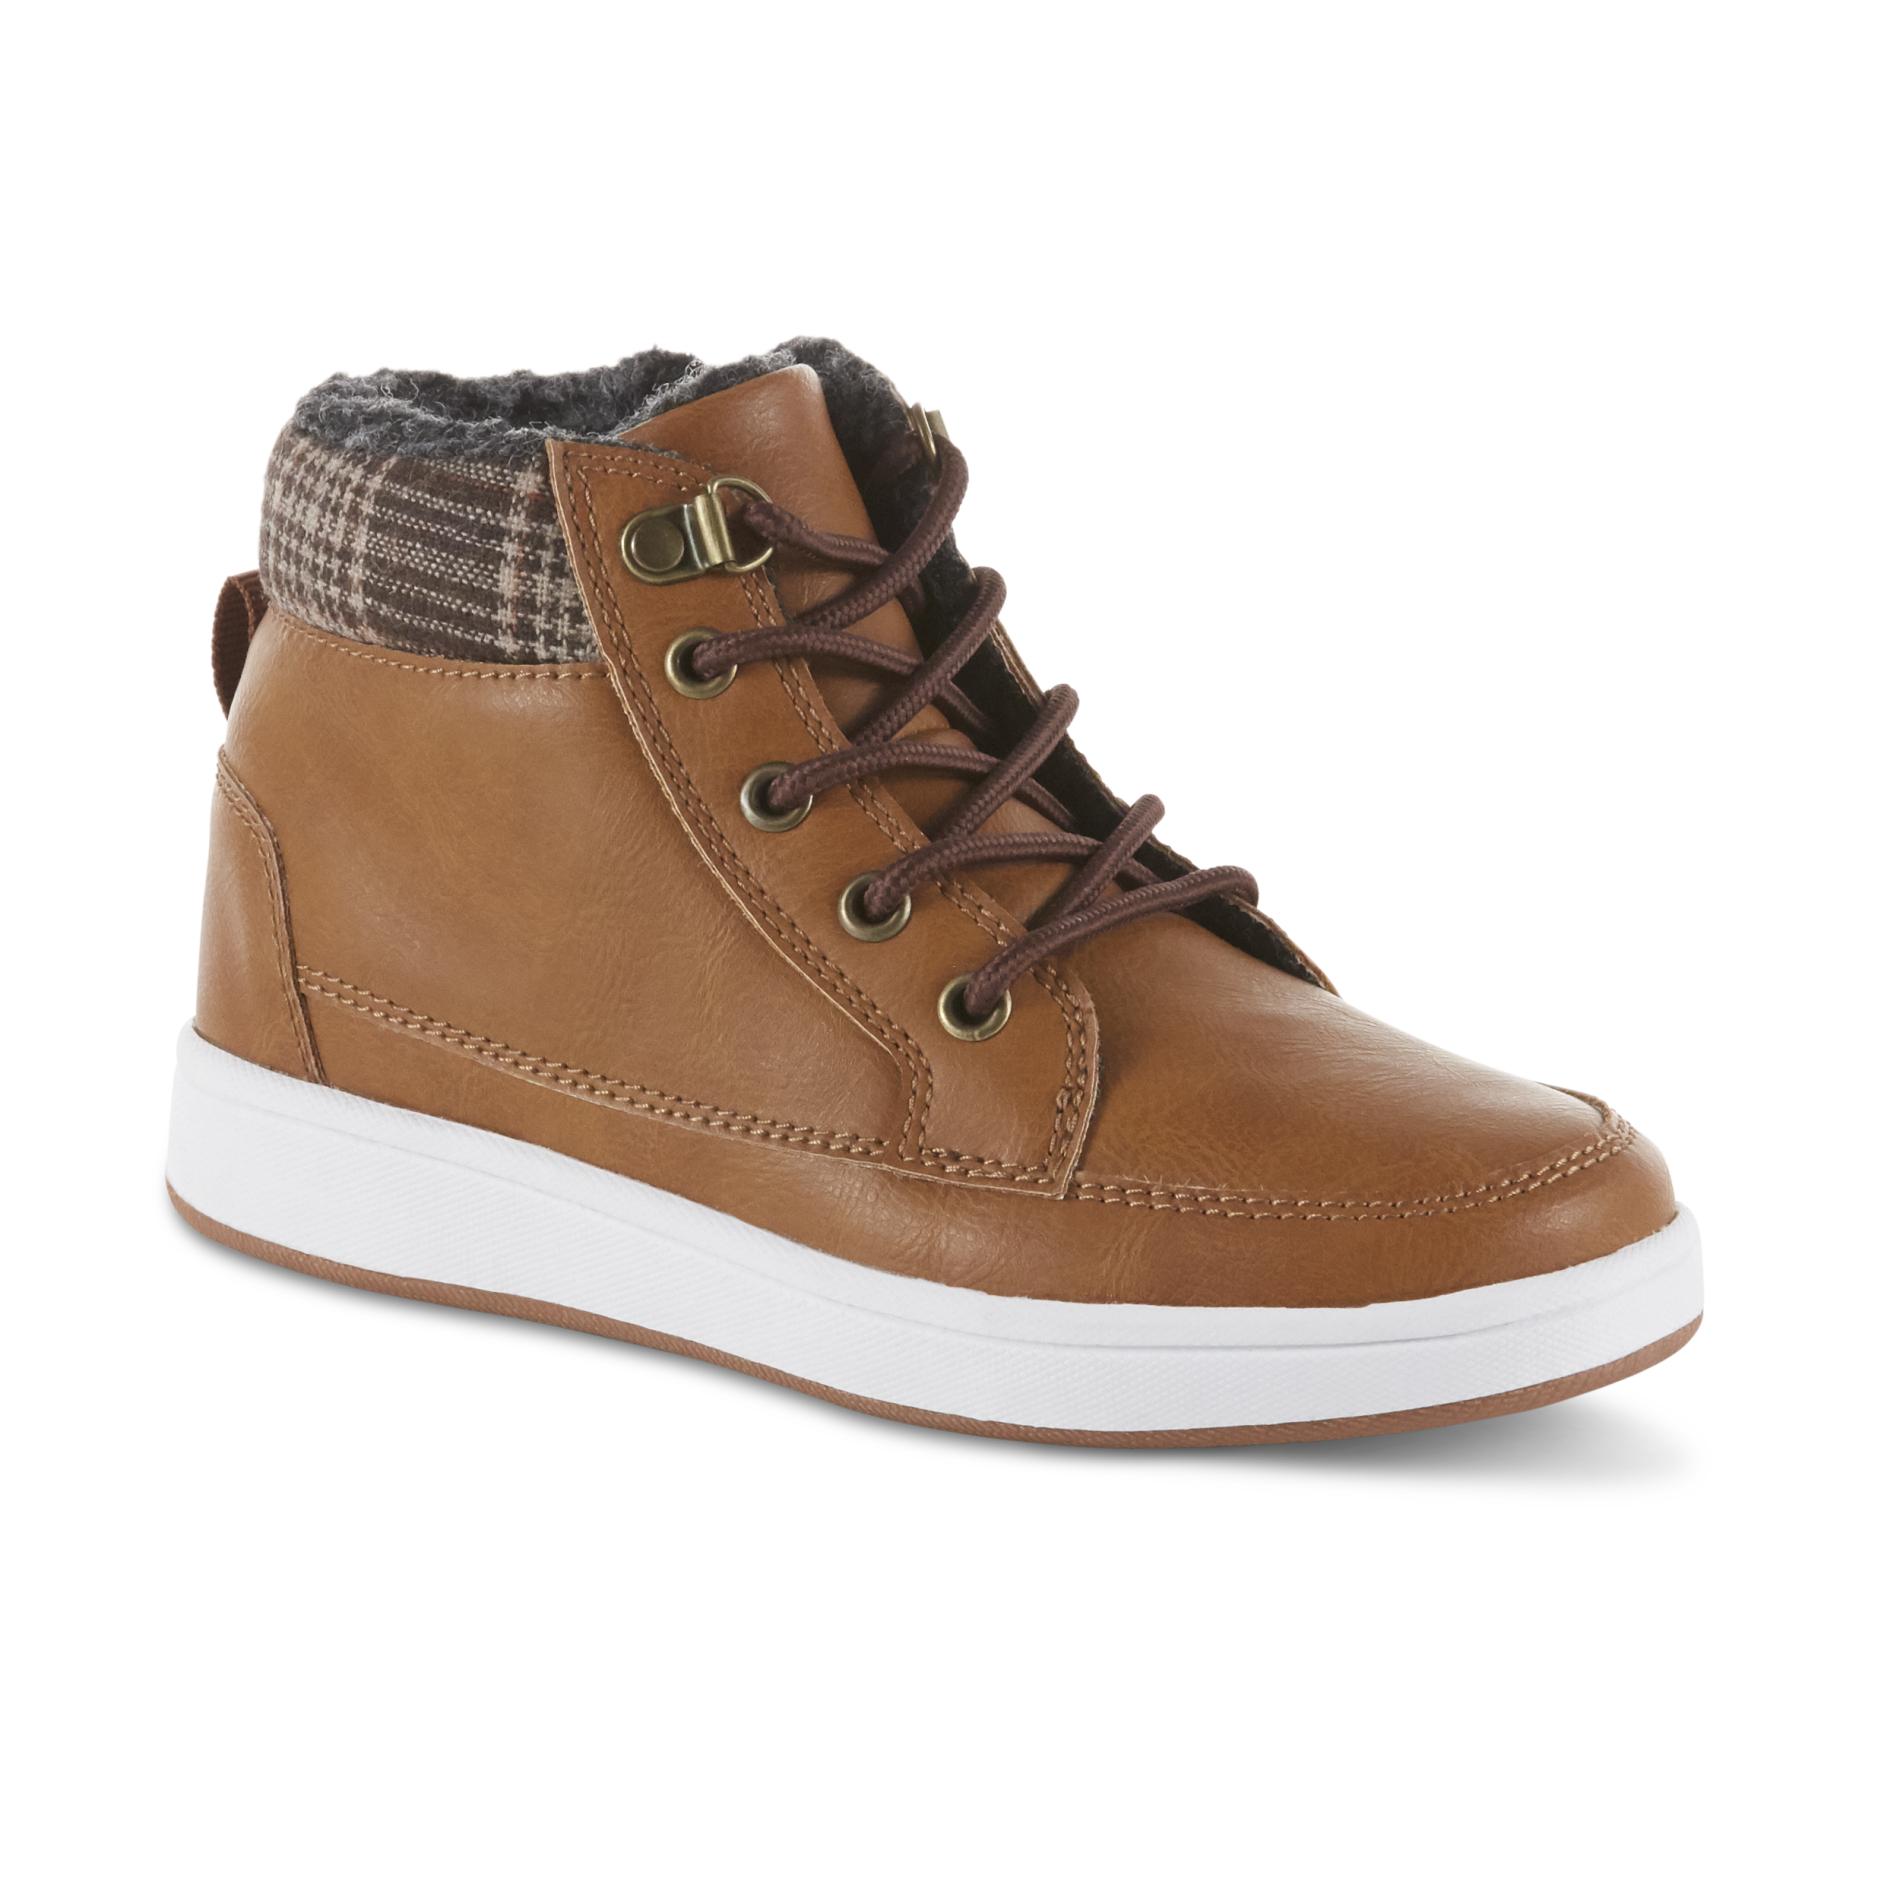 Route 66 Boys' Cannon Brown/Plaid High-Top Sneaker